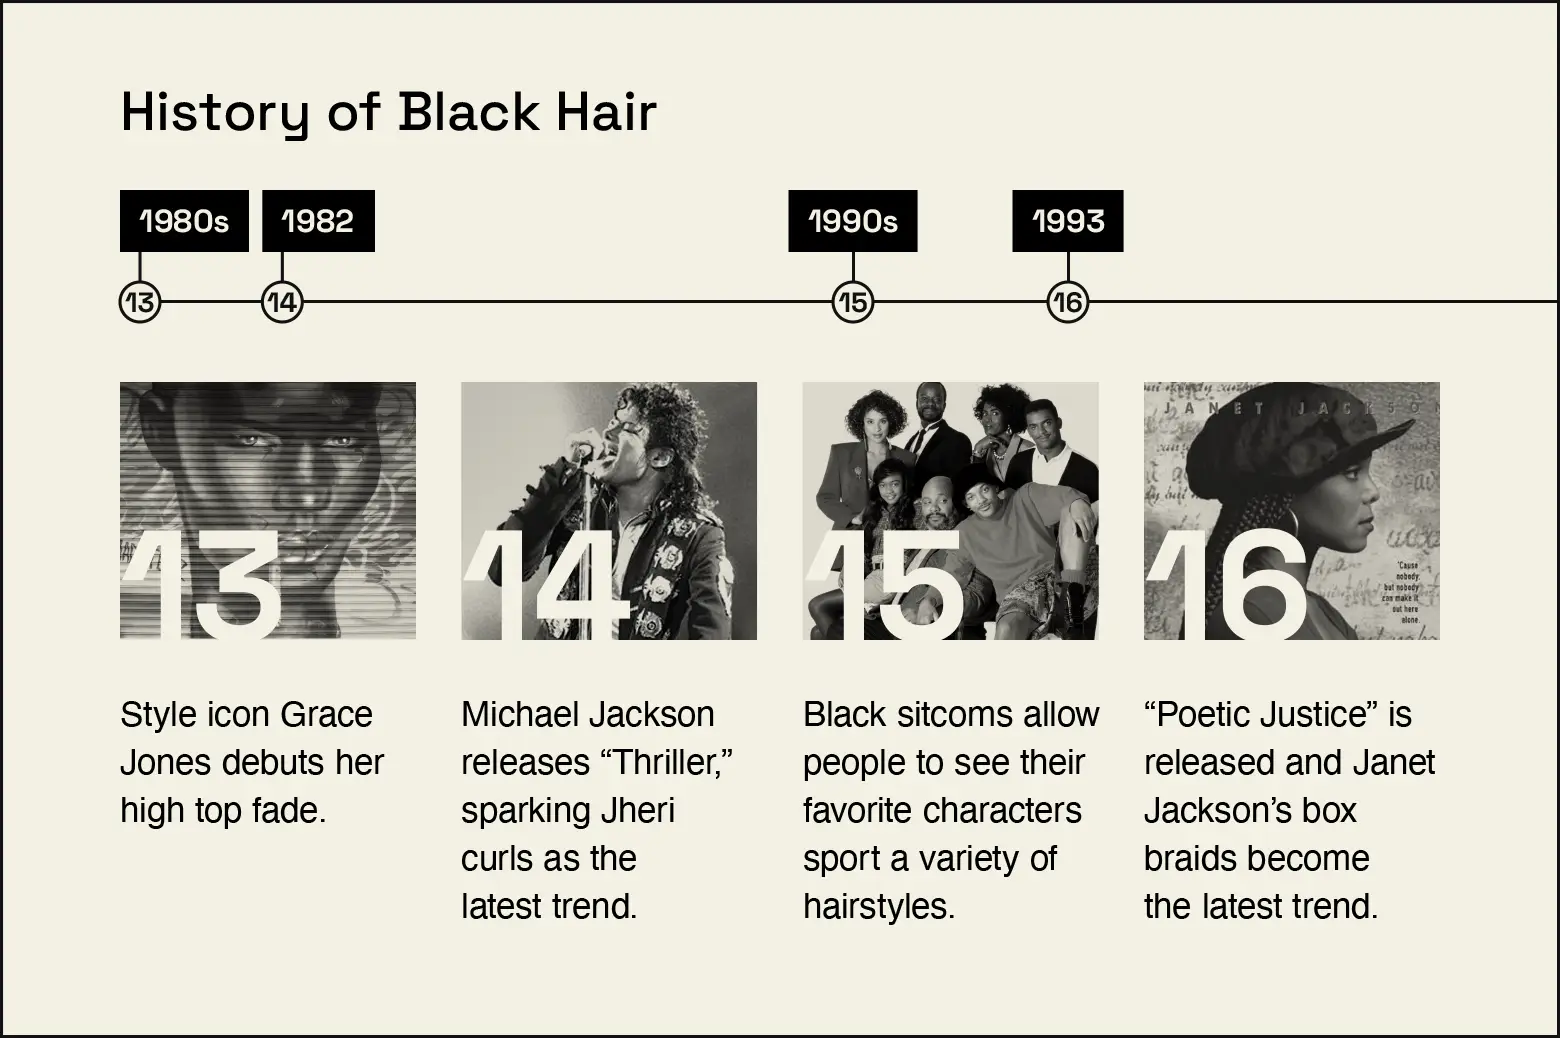 Timeline covers key moments in Black hair history regarding pop culture from the 1980s to 1993.